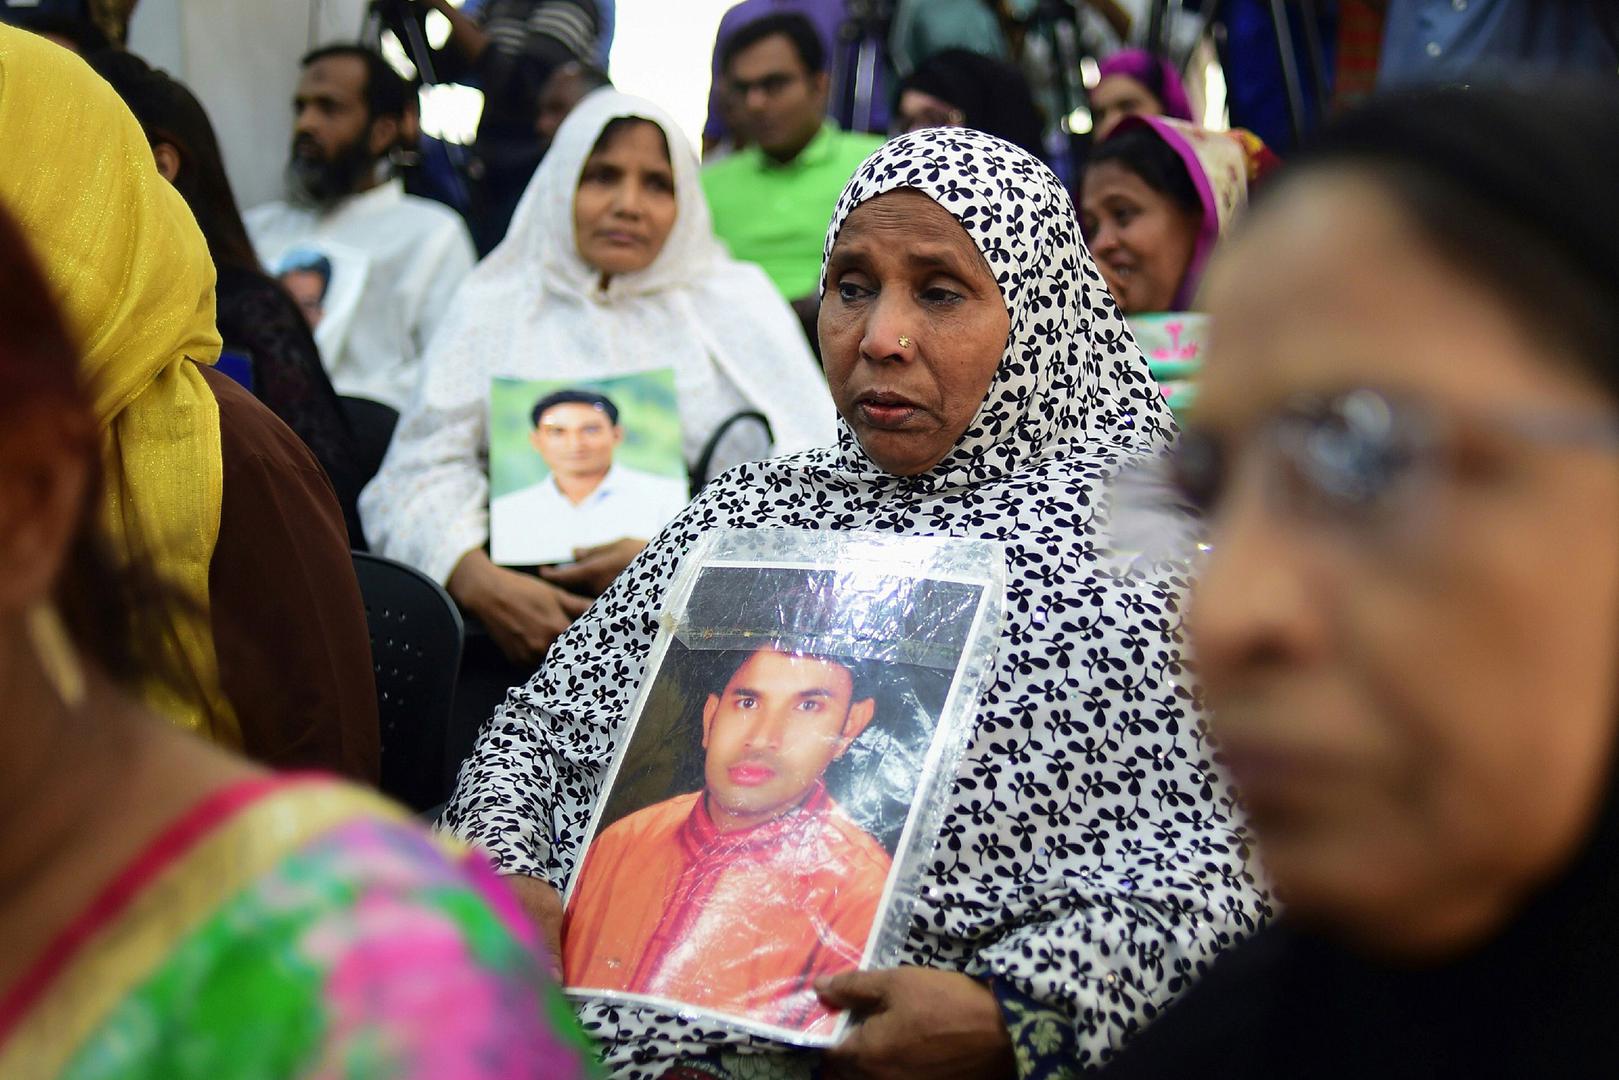 Bangladeshis hold photos of missing relatives during a press meeting in Dhaka on December 4, 2018.  Hundreds joined in the protest demanding justice for the victims. © 2018 Munir UZ ZAMAN / AFP/ Getty Images